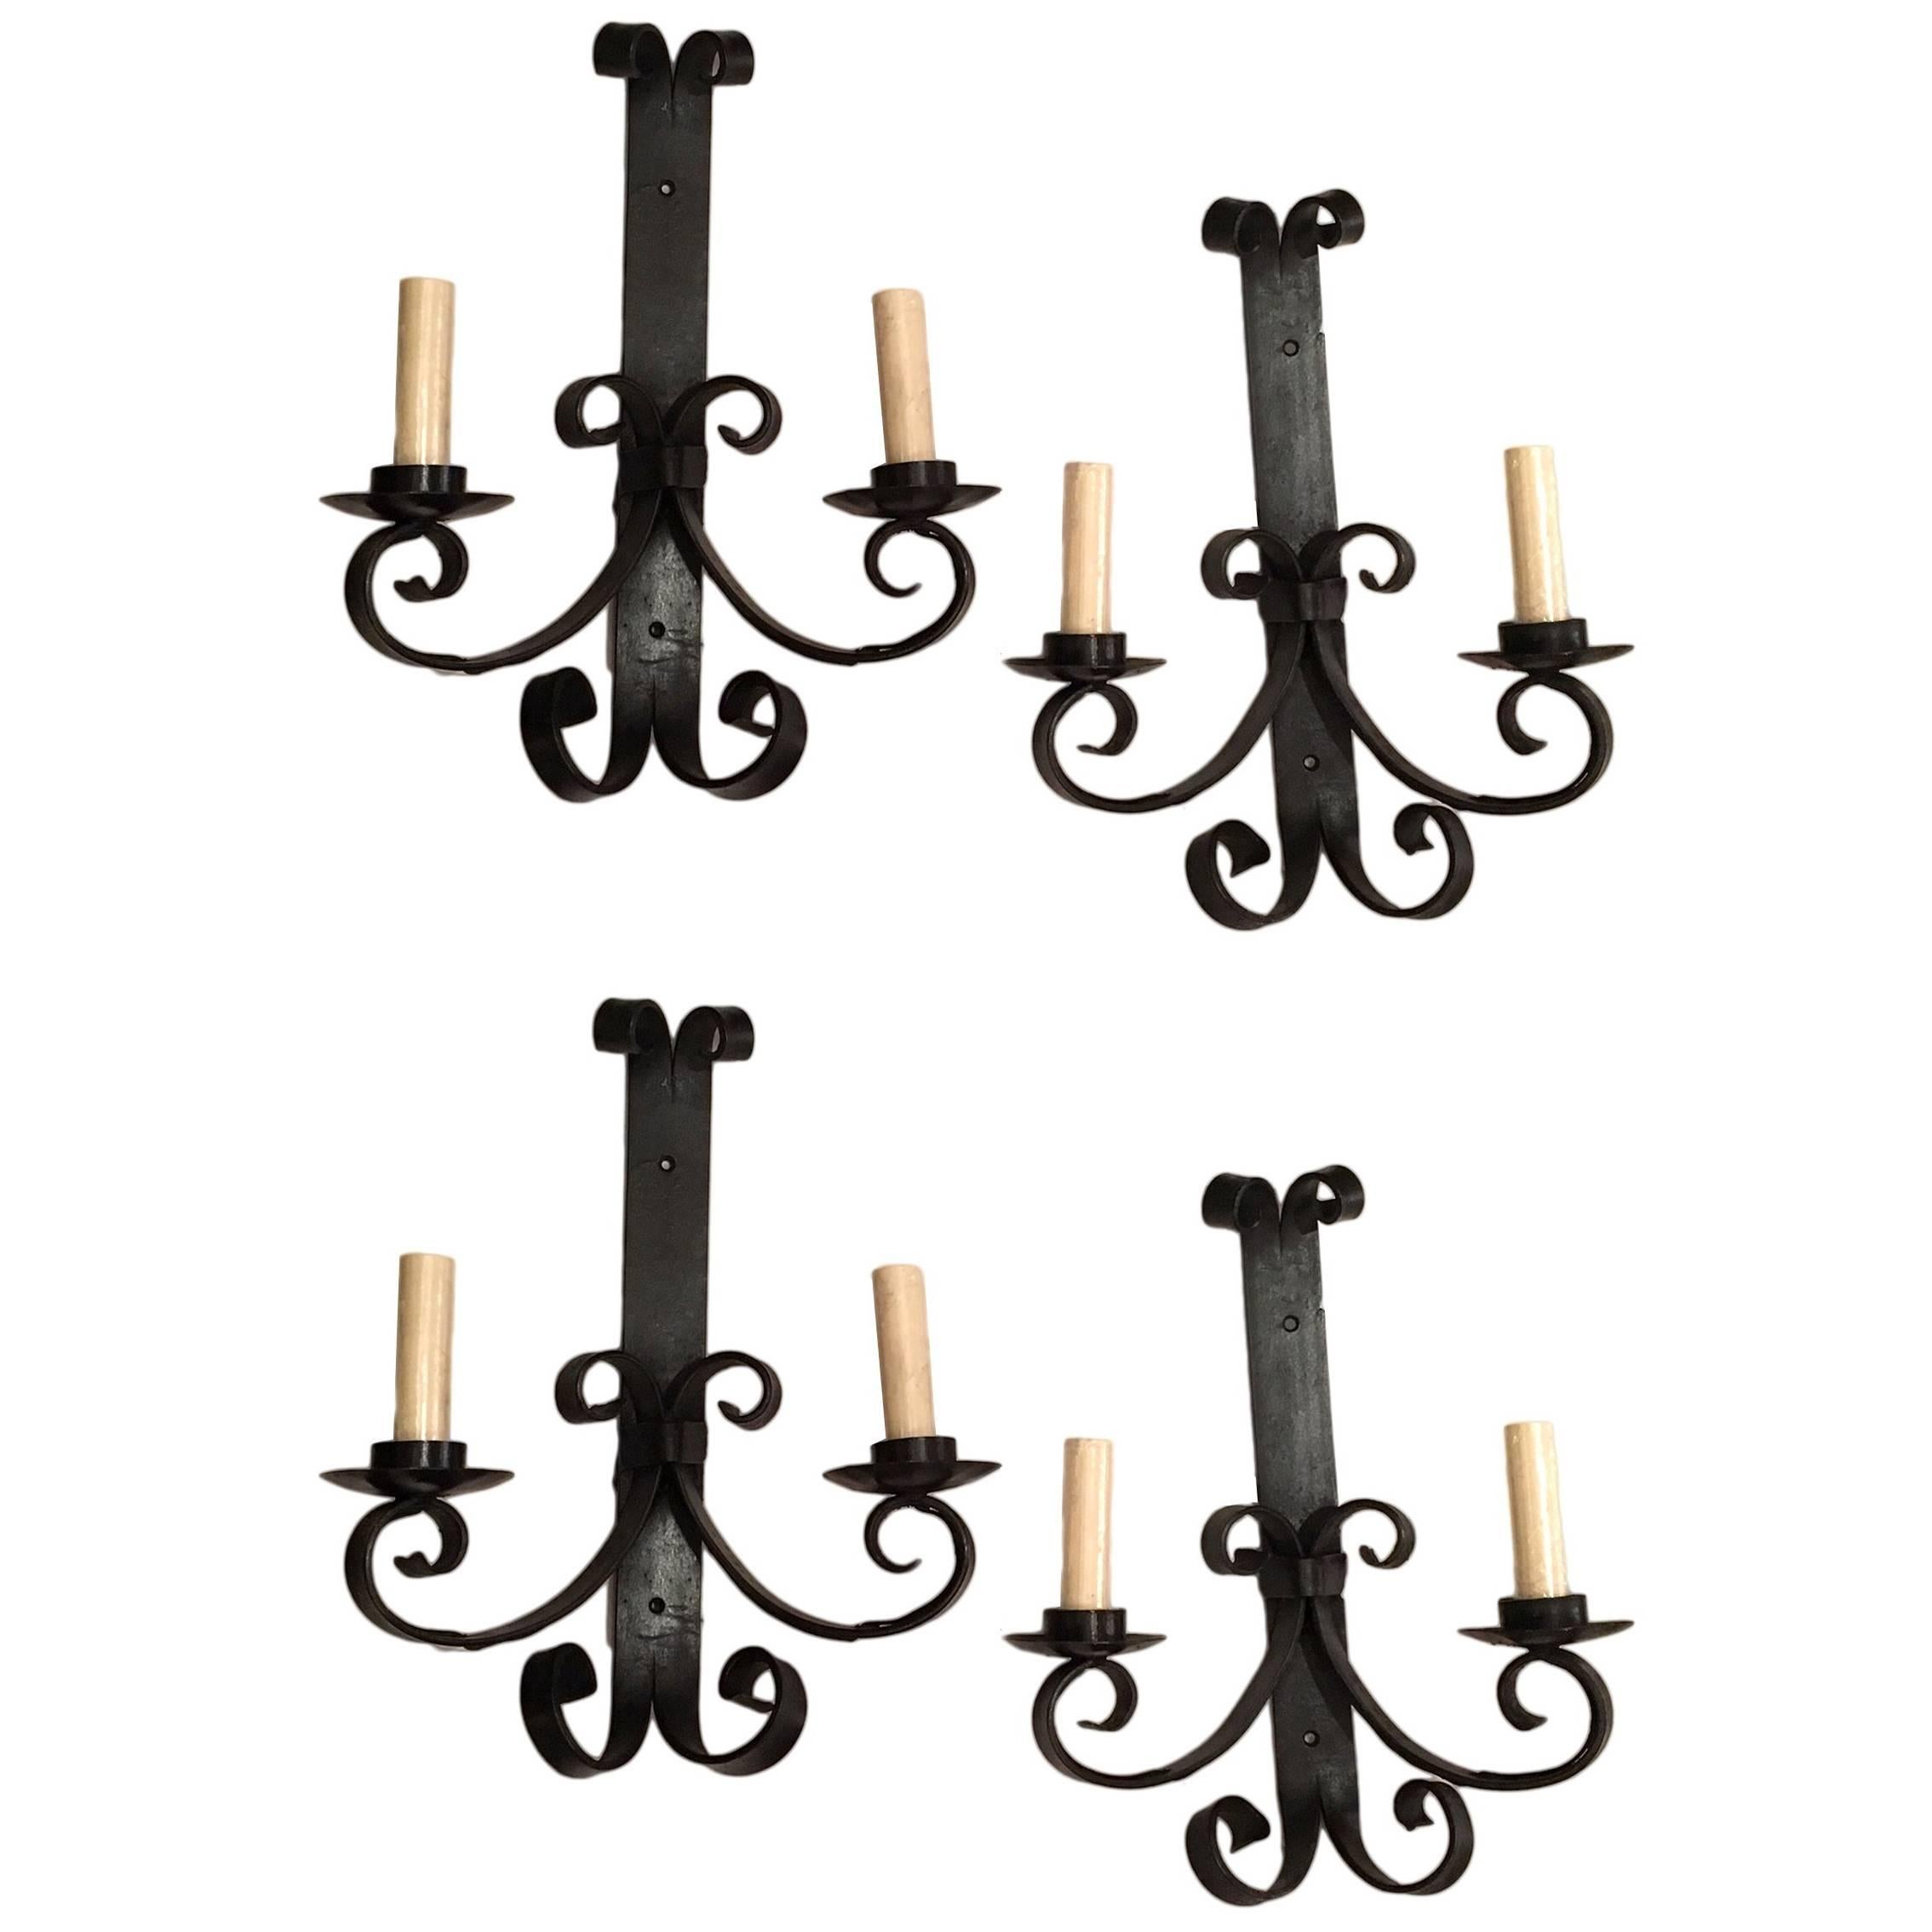 Set of four circa 1950's Italian wrought iron sconces. Sold per pair.

Measurements:
Height: 14.5